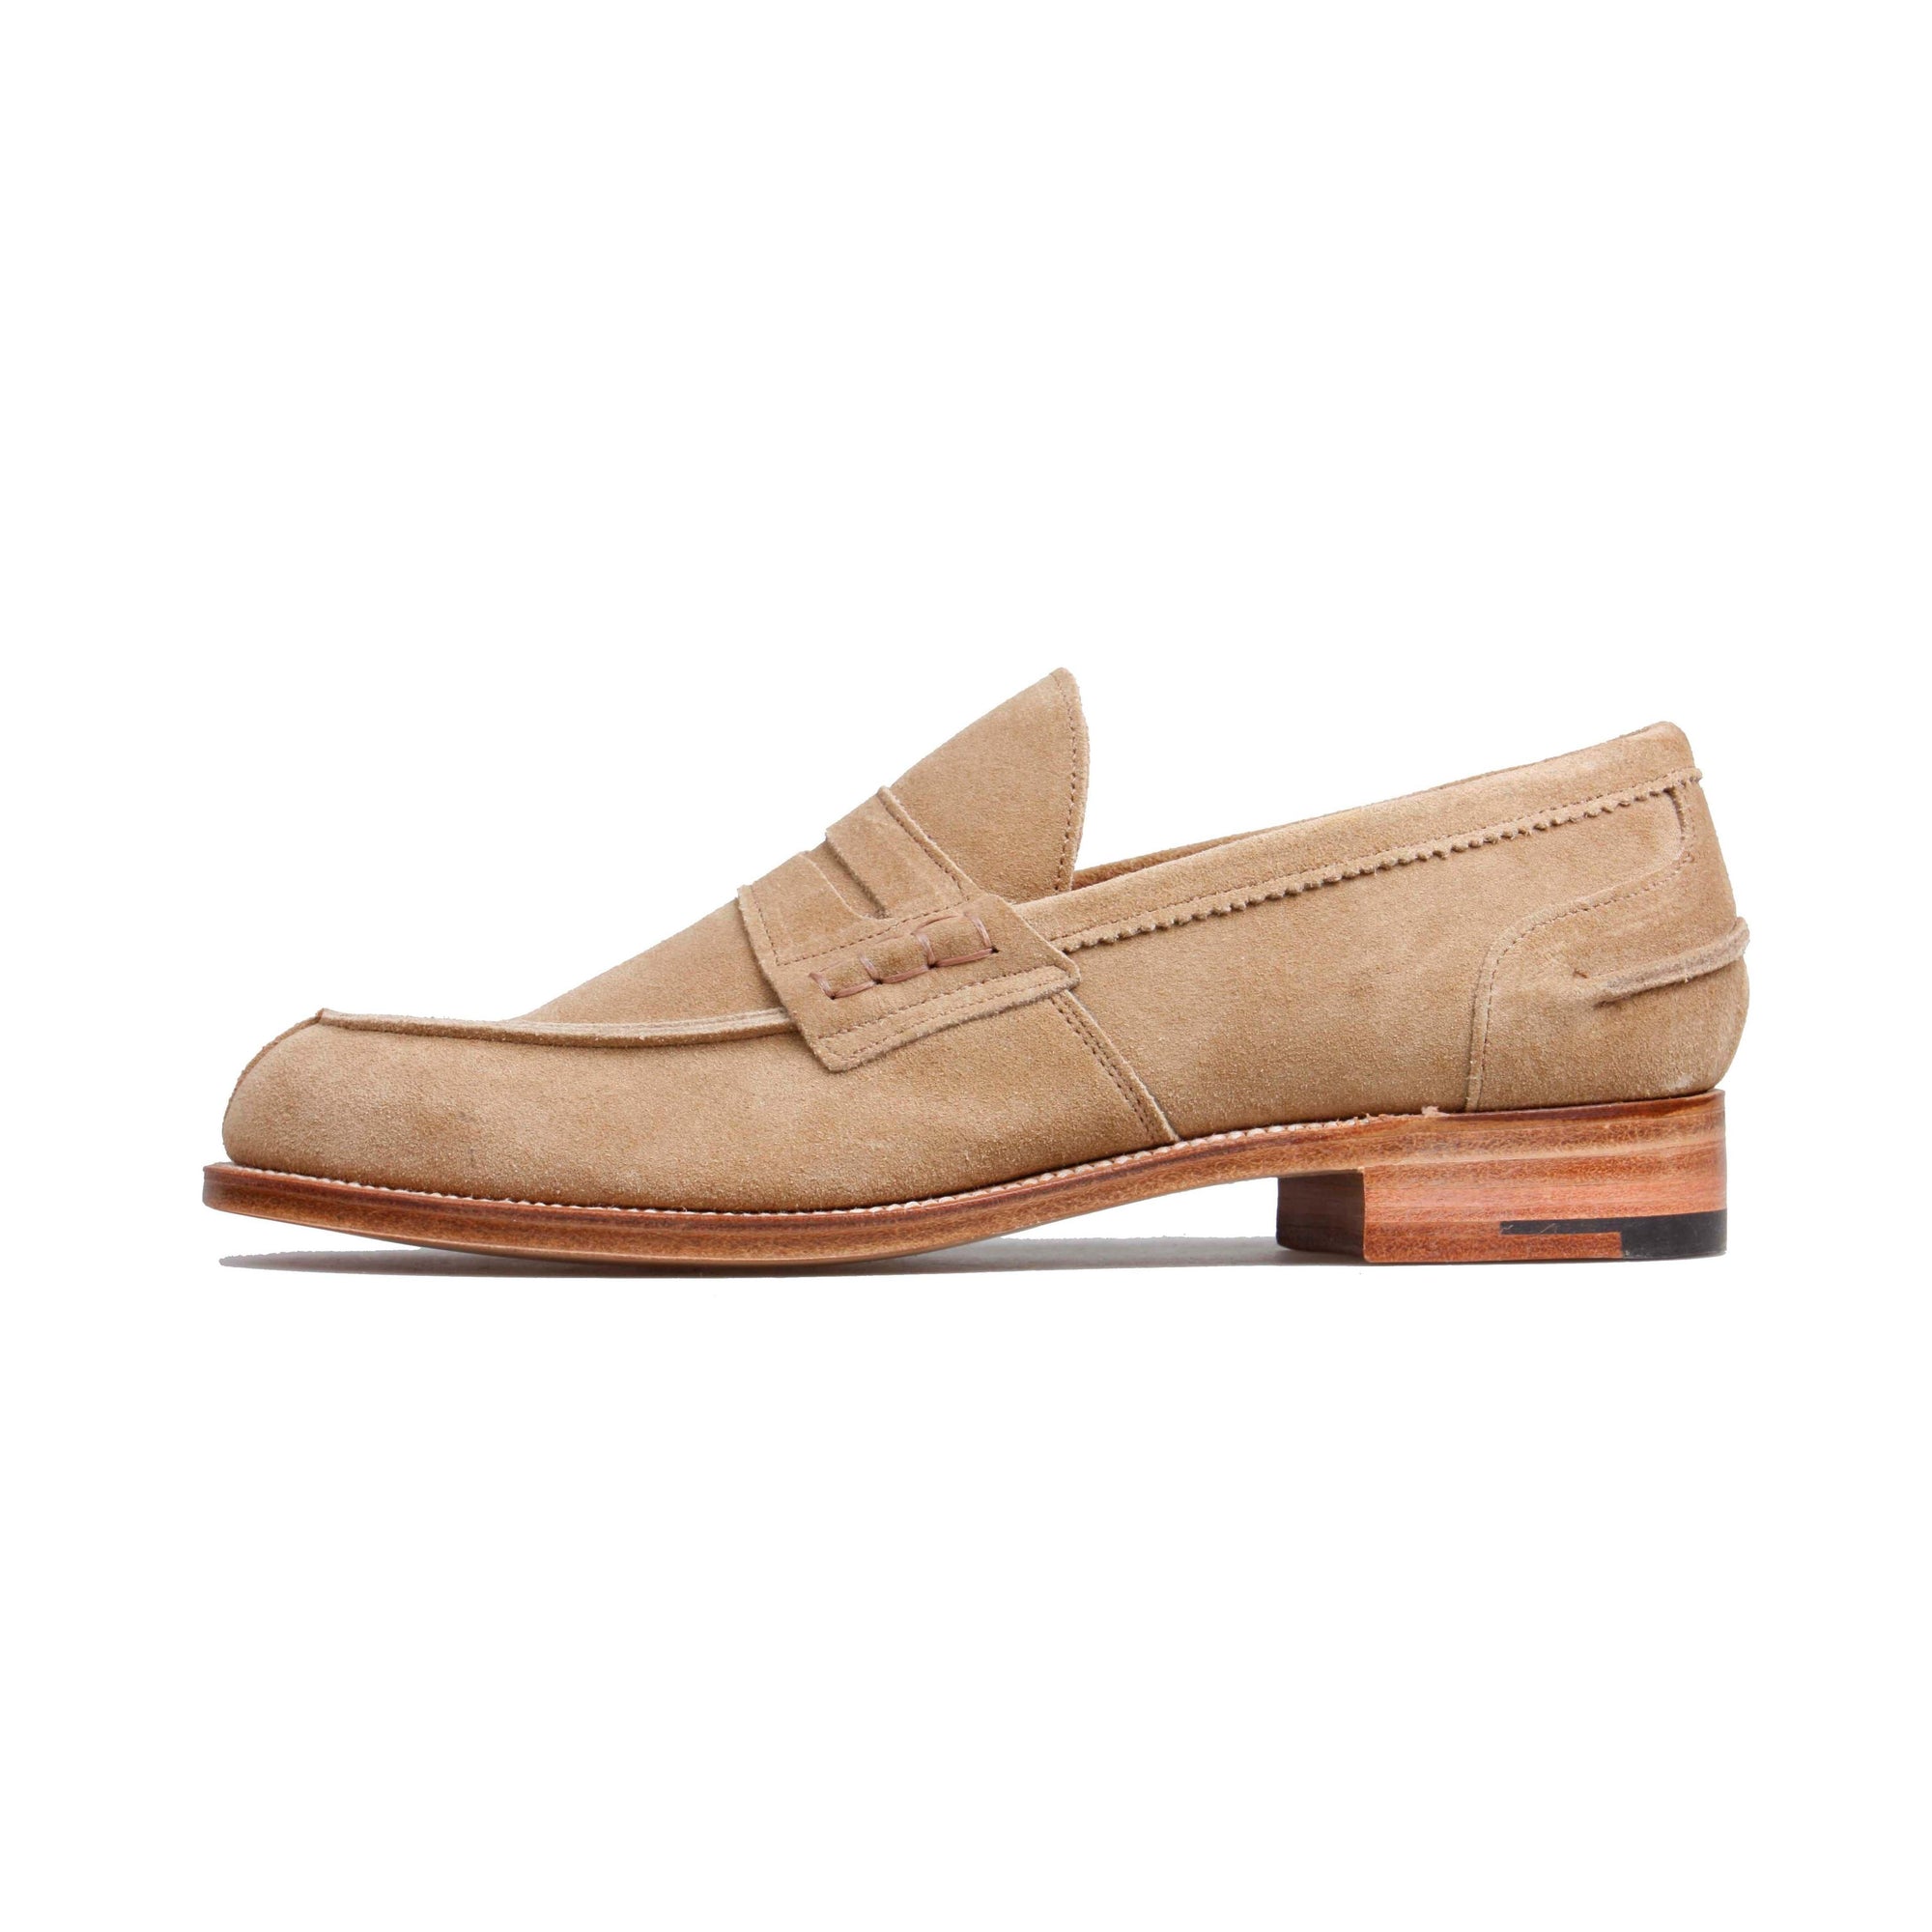 Loafer-Tricker's-Conrad Hasselbach Shoes & Garment